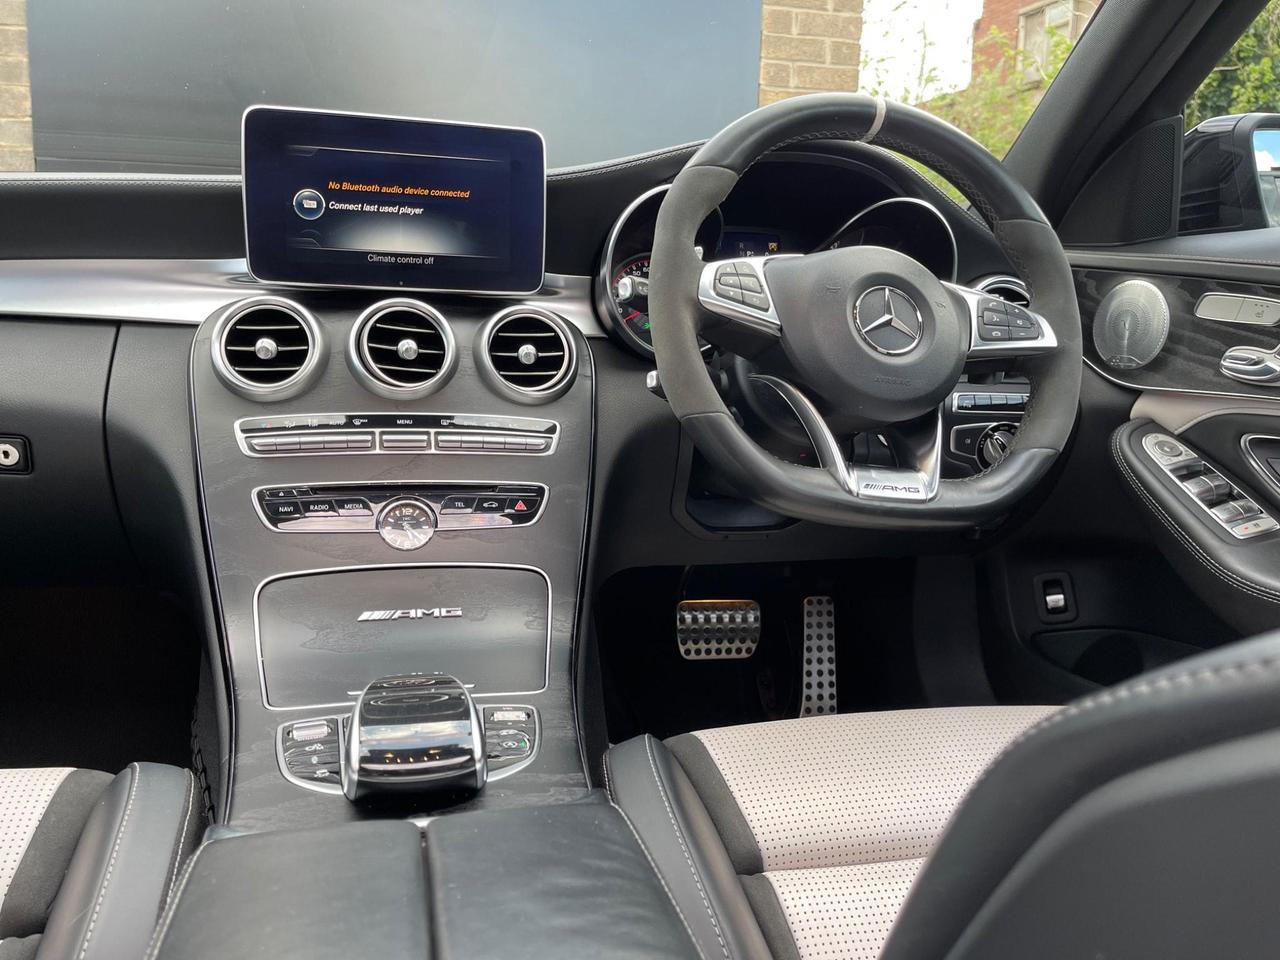 Used 2016 Mercedes-Benz C Class for sale in Sheffield